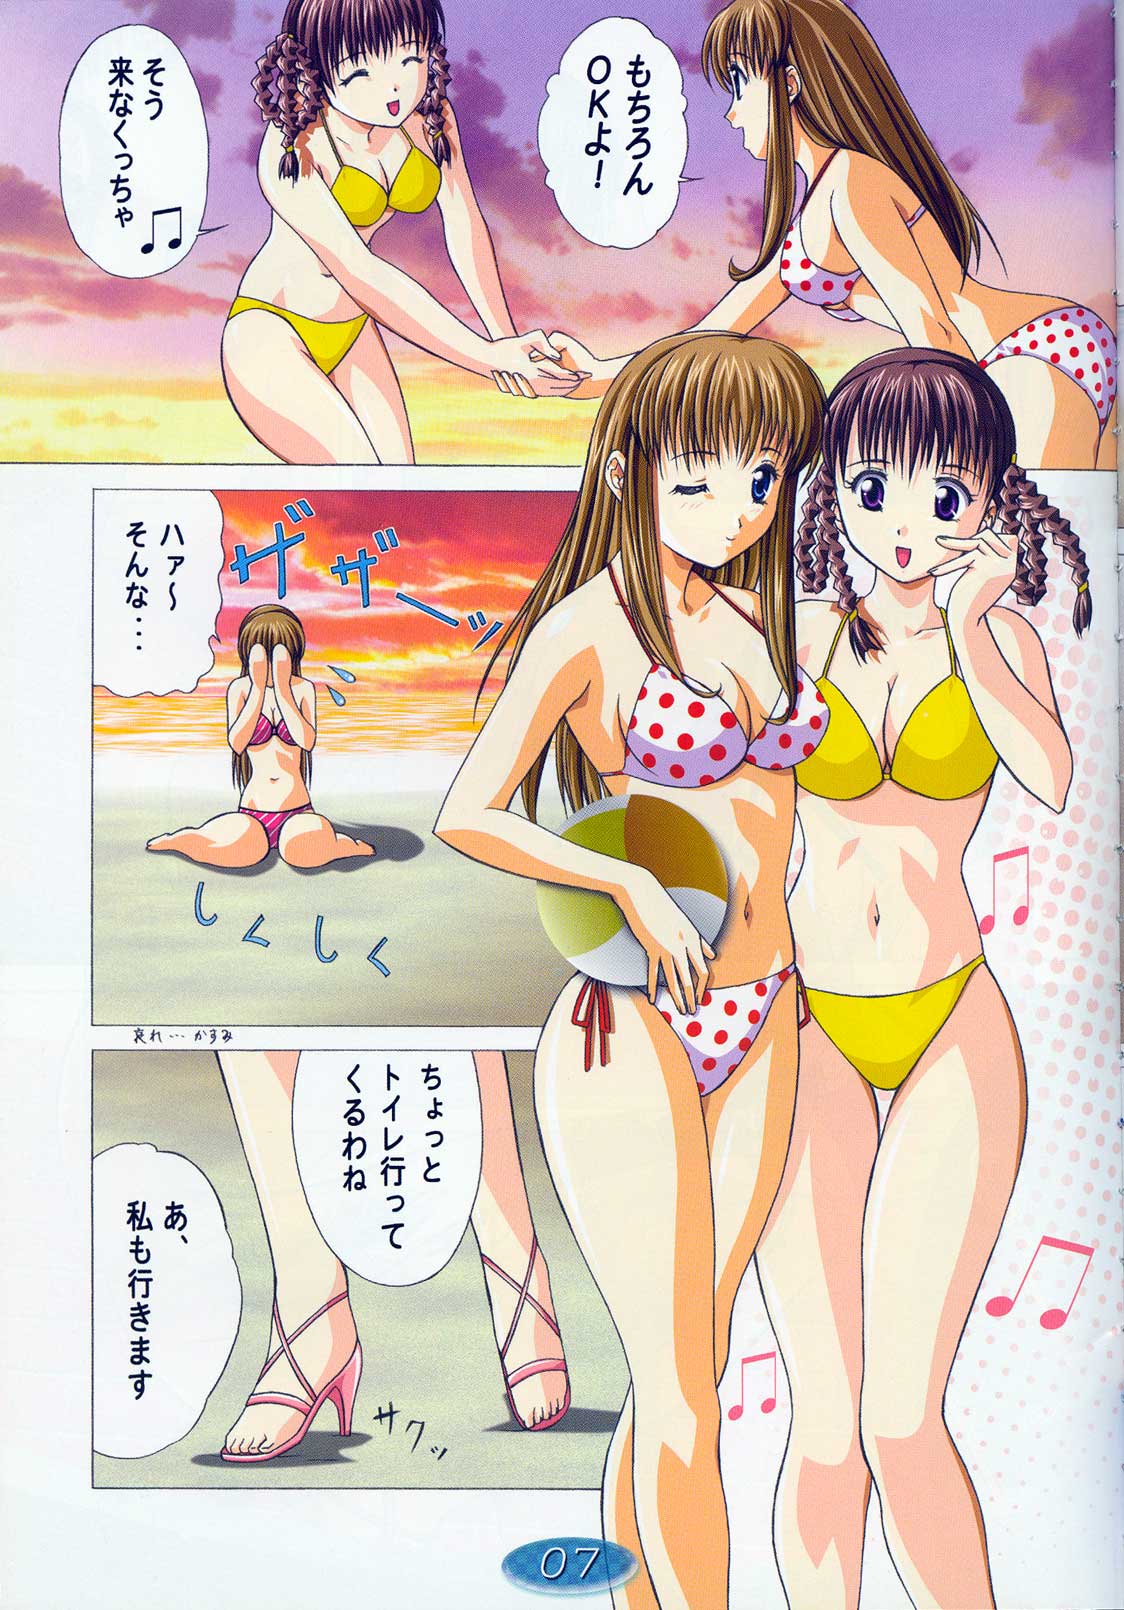 (C64) [Gourmet Puff-puff (Dr.momo)] TRIPLE EXS (Dead or Alive) page 6 full